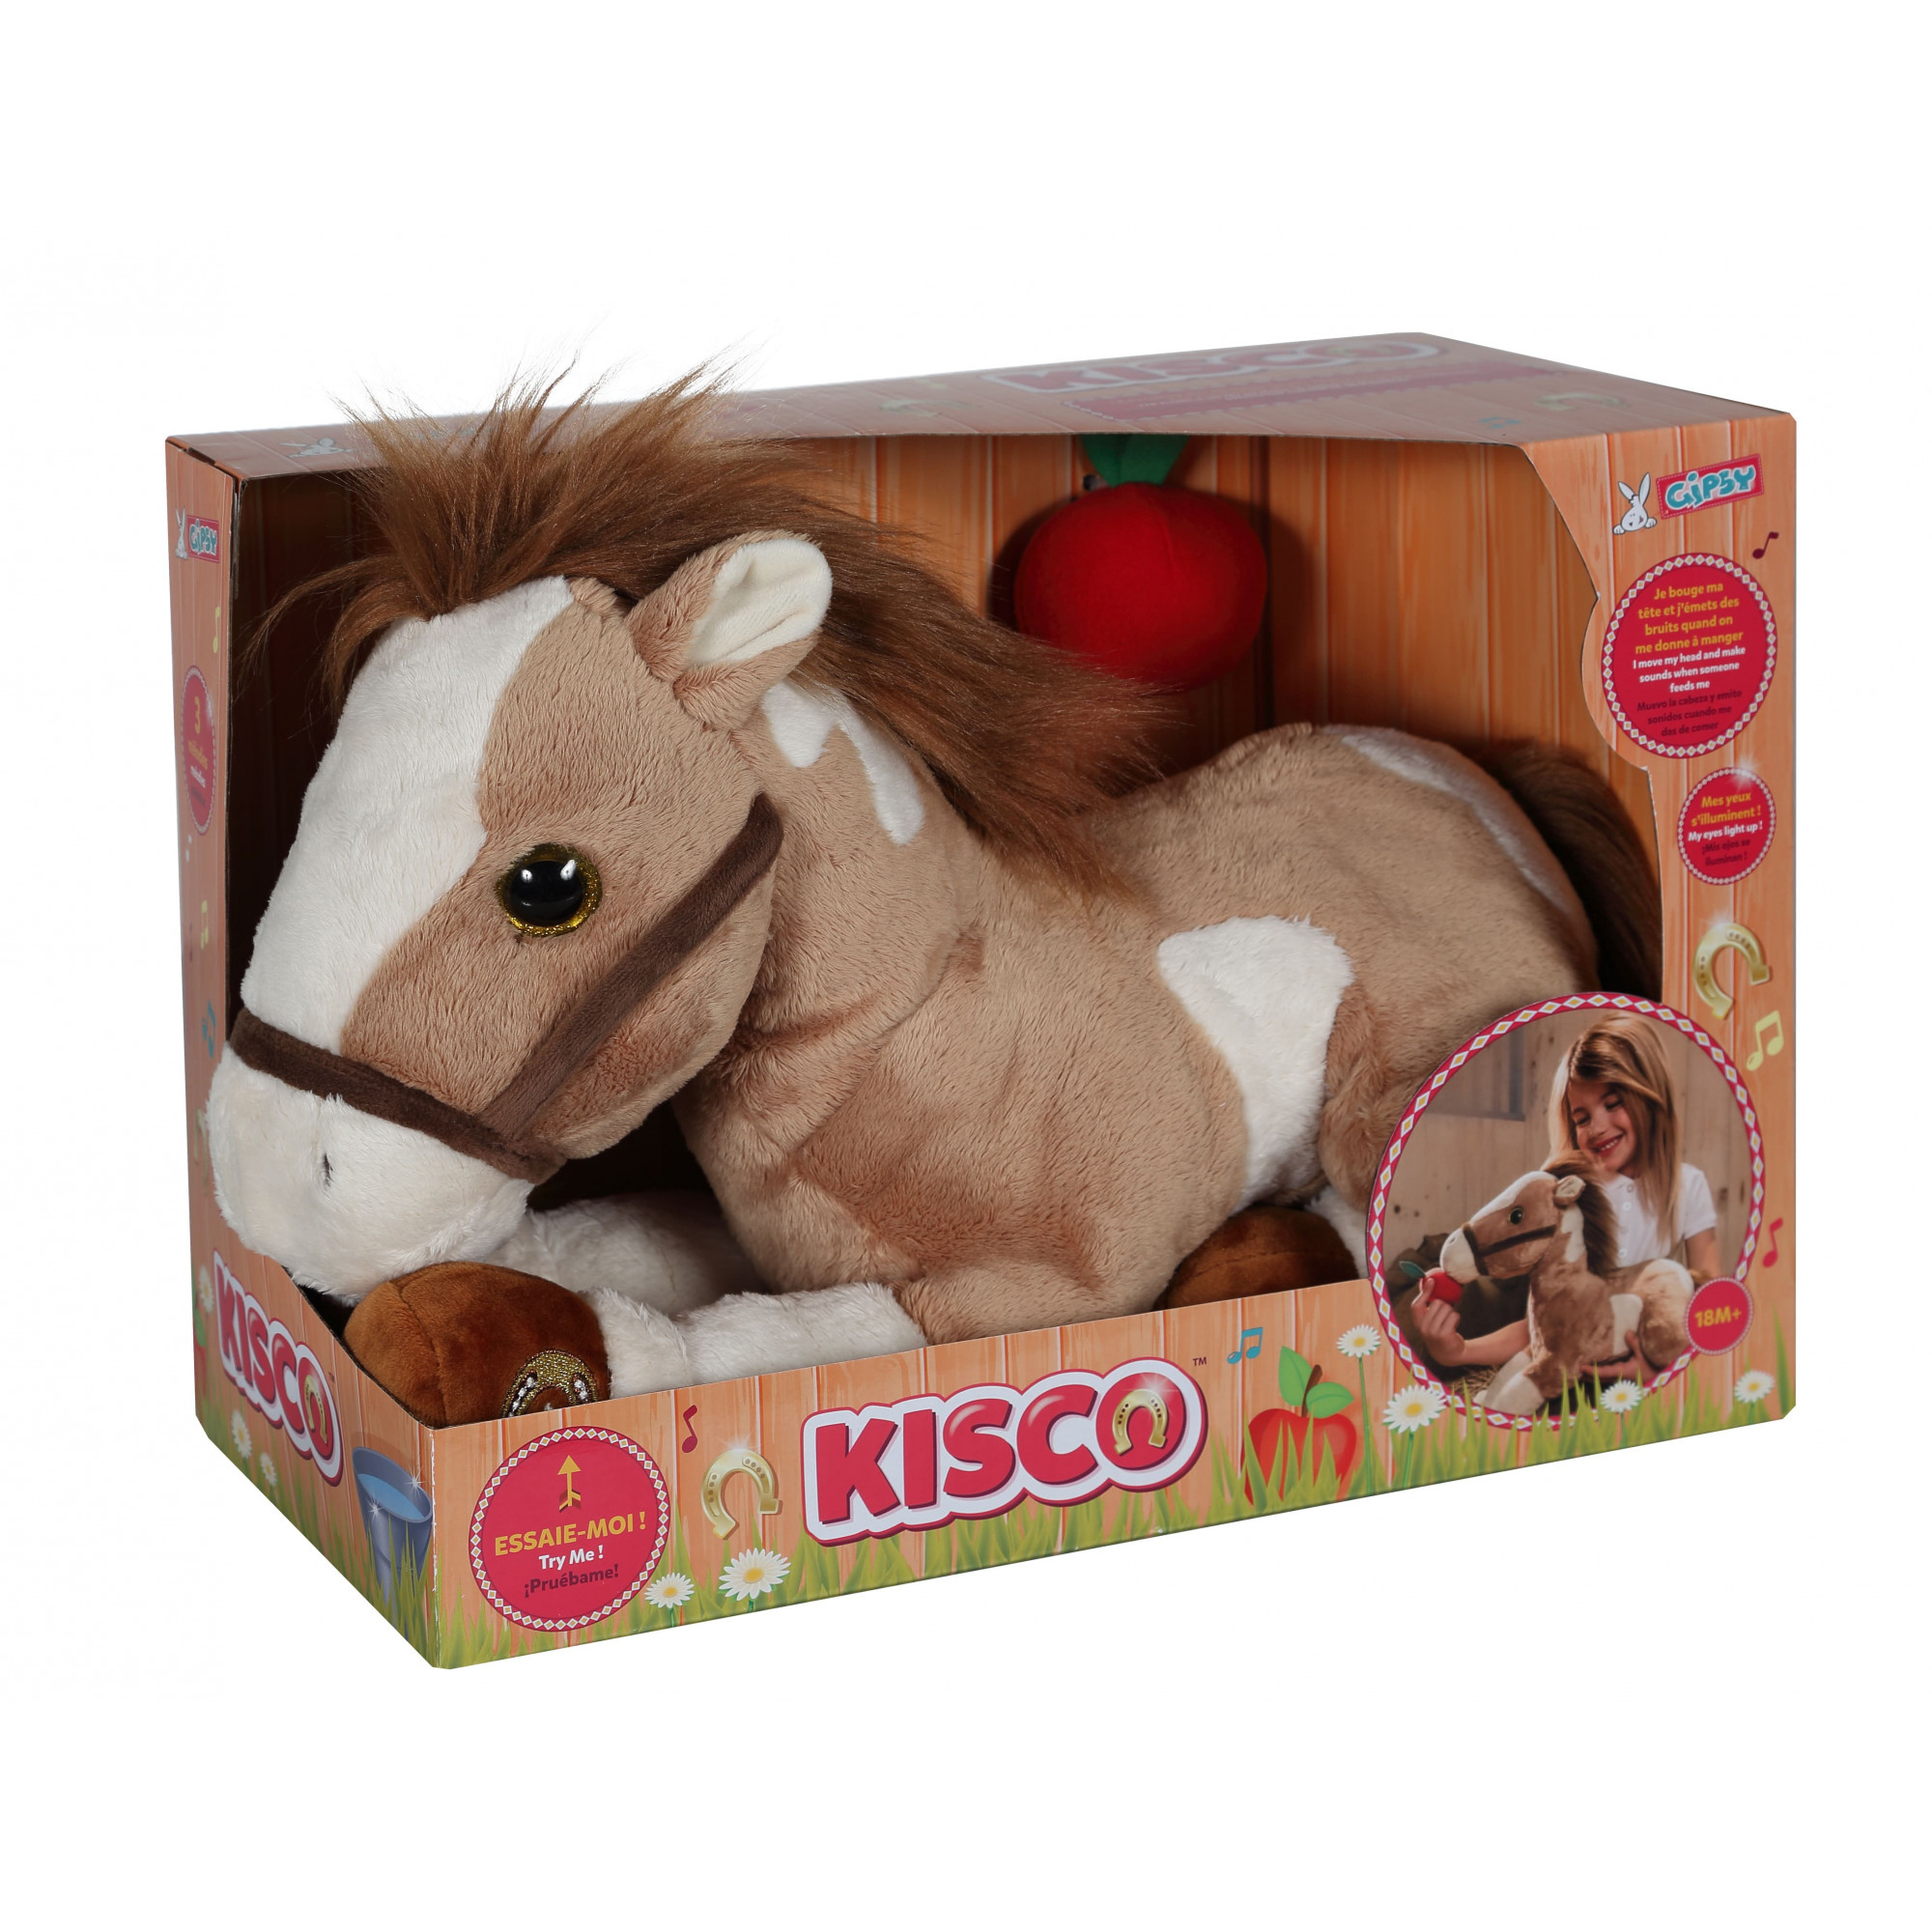 Kisco Horse with sound and light up - 35 cm